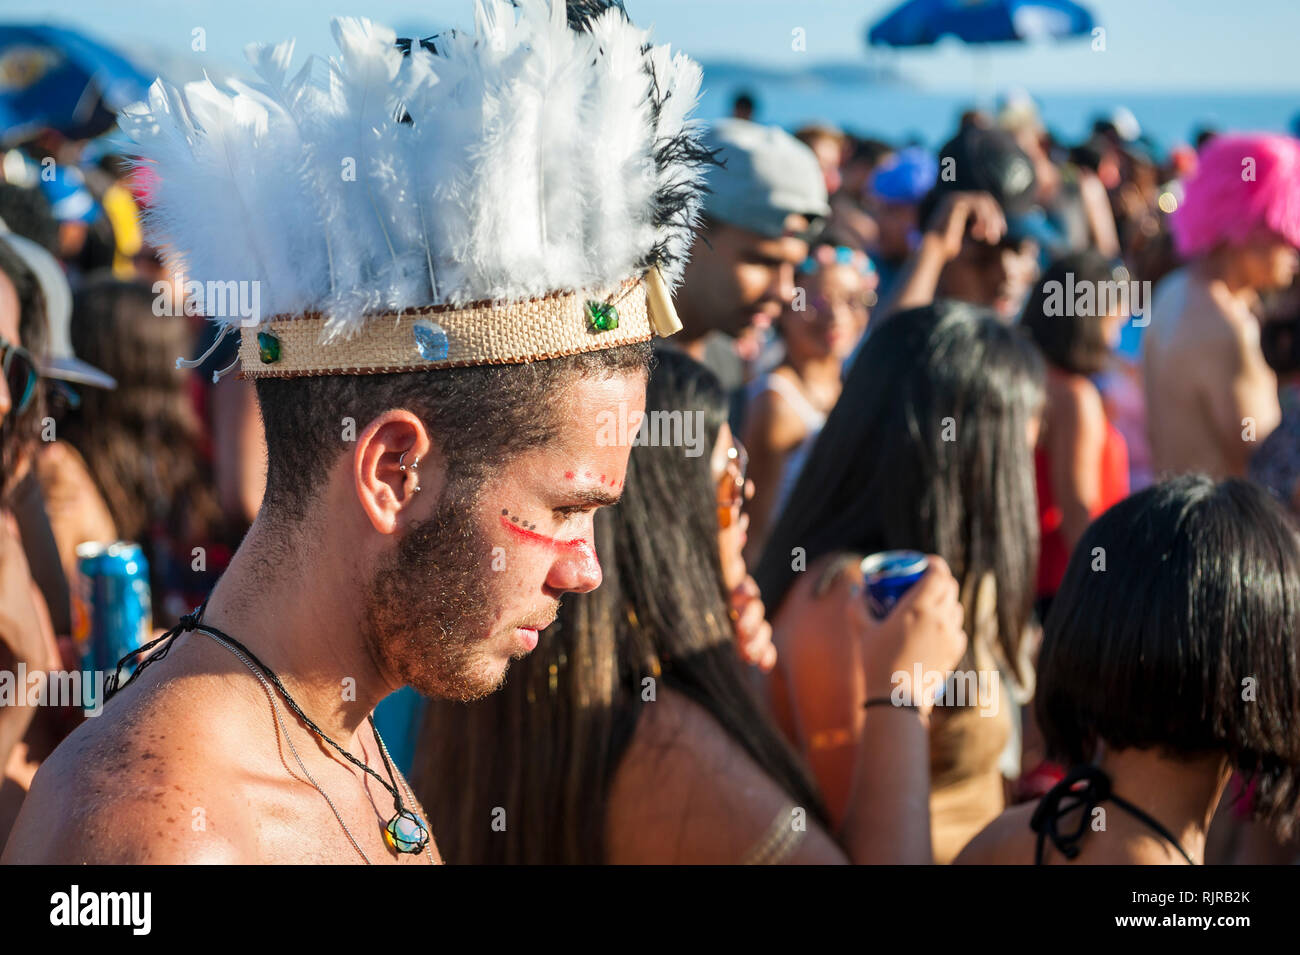 RIO DE JANEIRO - FEBRUARY 28, 2017: A young Brazilian man dresses up in Native American face paint and headdress at a Carnival street party in Ipanema Stock Photo